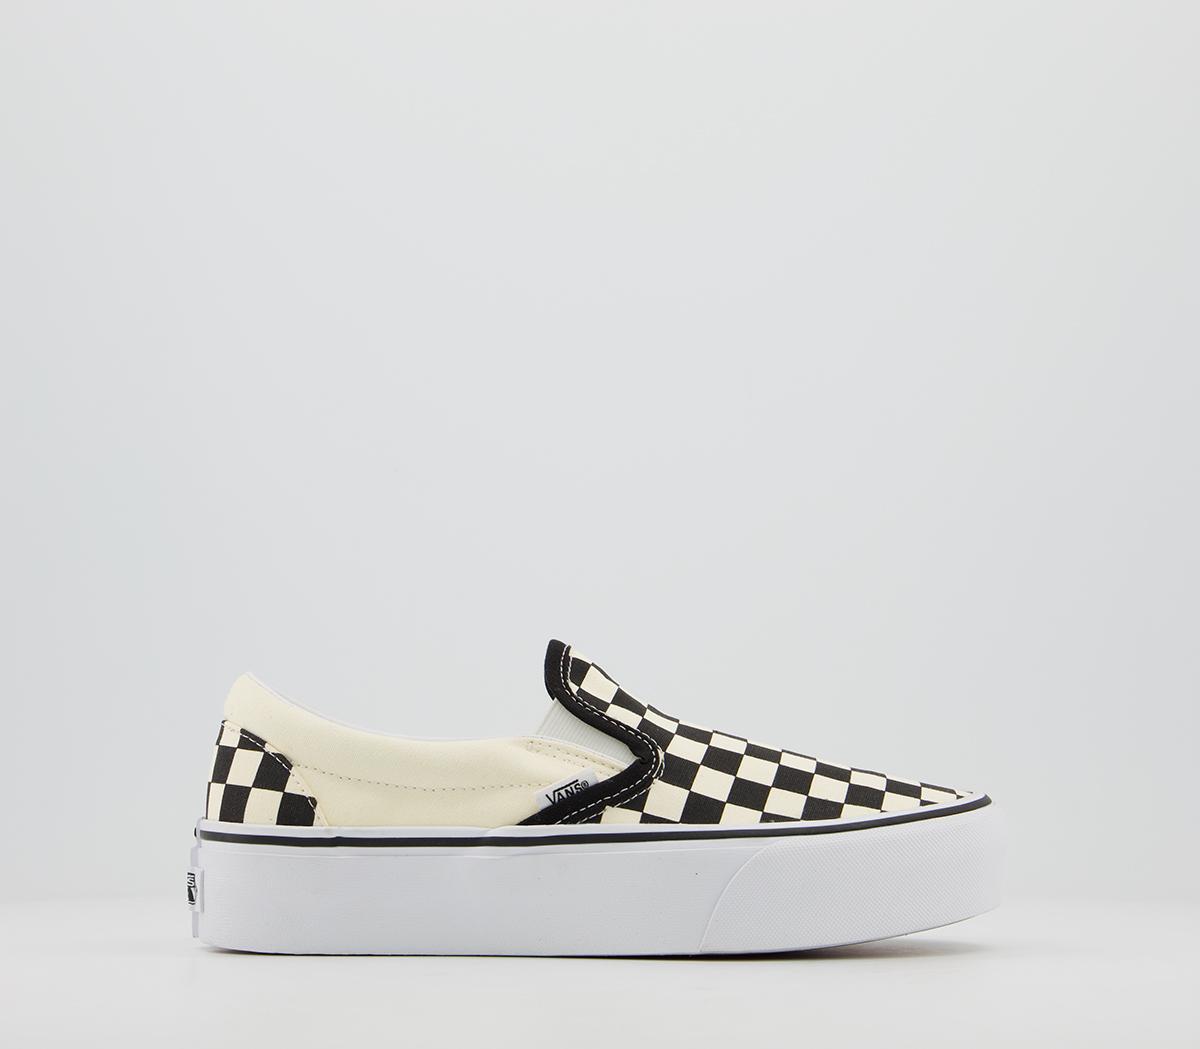 black and white checkered vans size 3